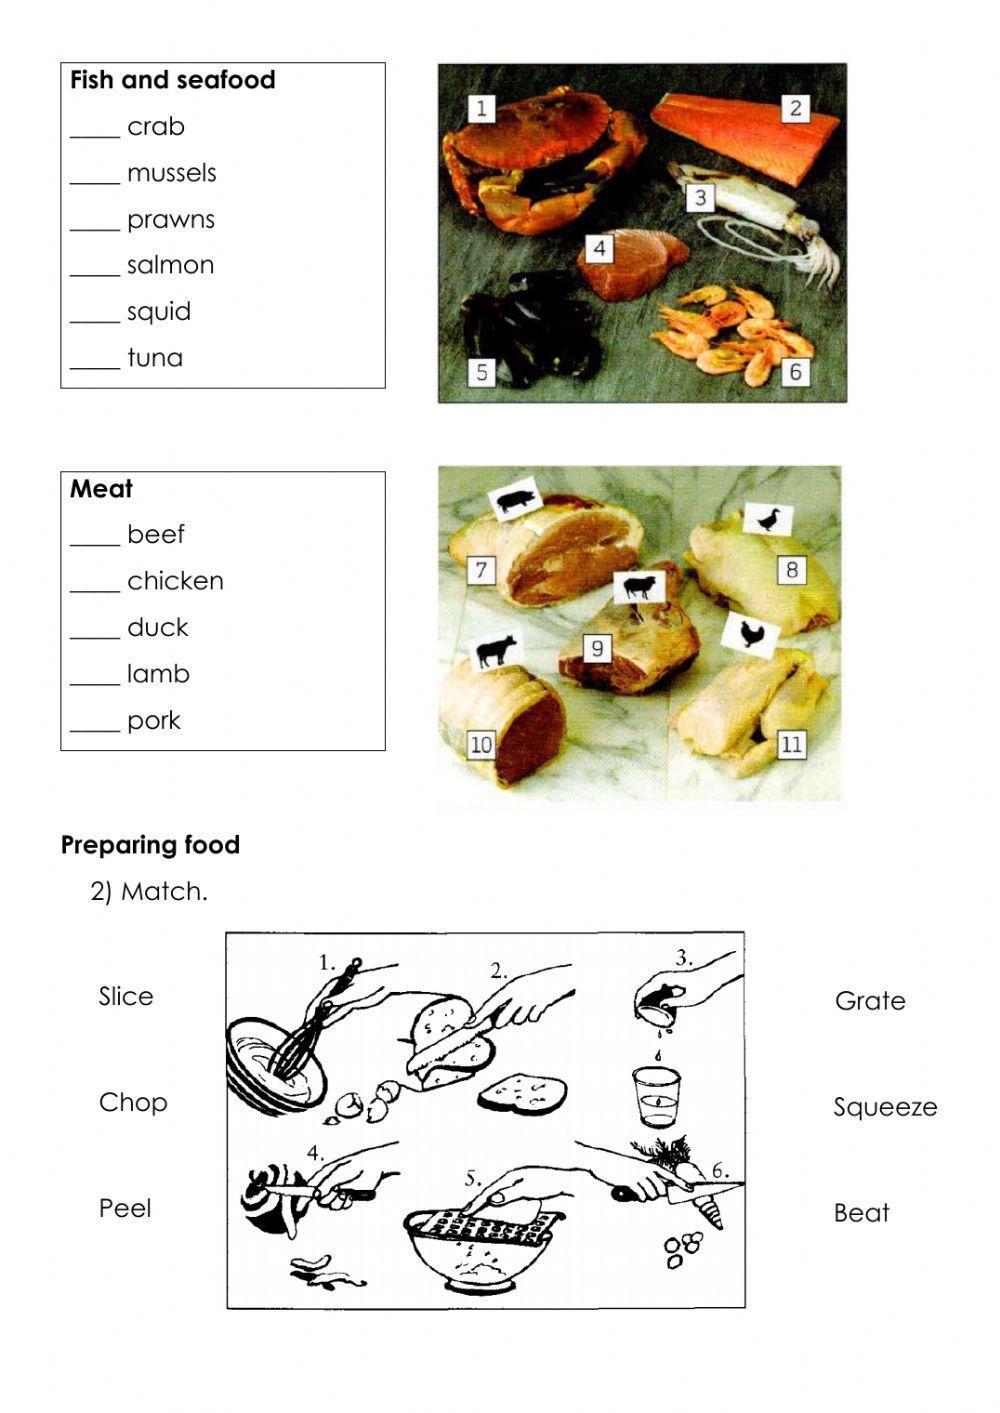 Food, drinks and cooking- Vocabulary Revision